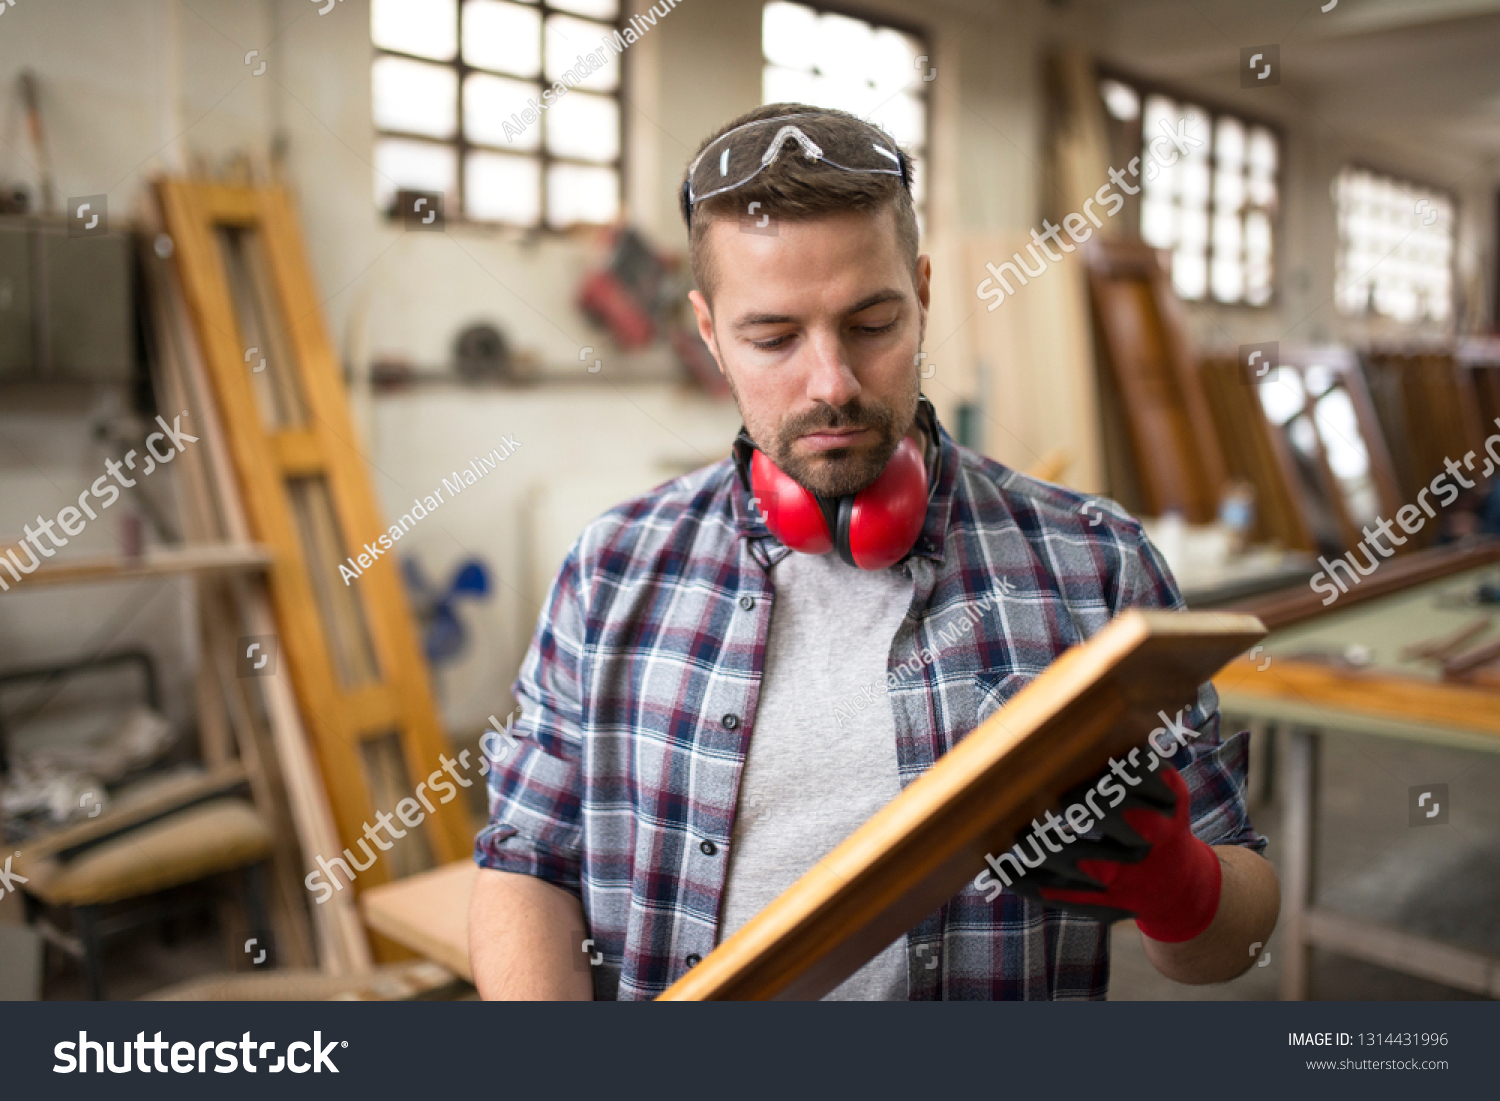 Focused professional worker carpenter checking quality of wood product in carpentry workshop. #1314431996